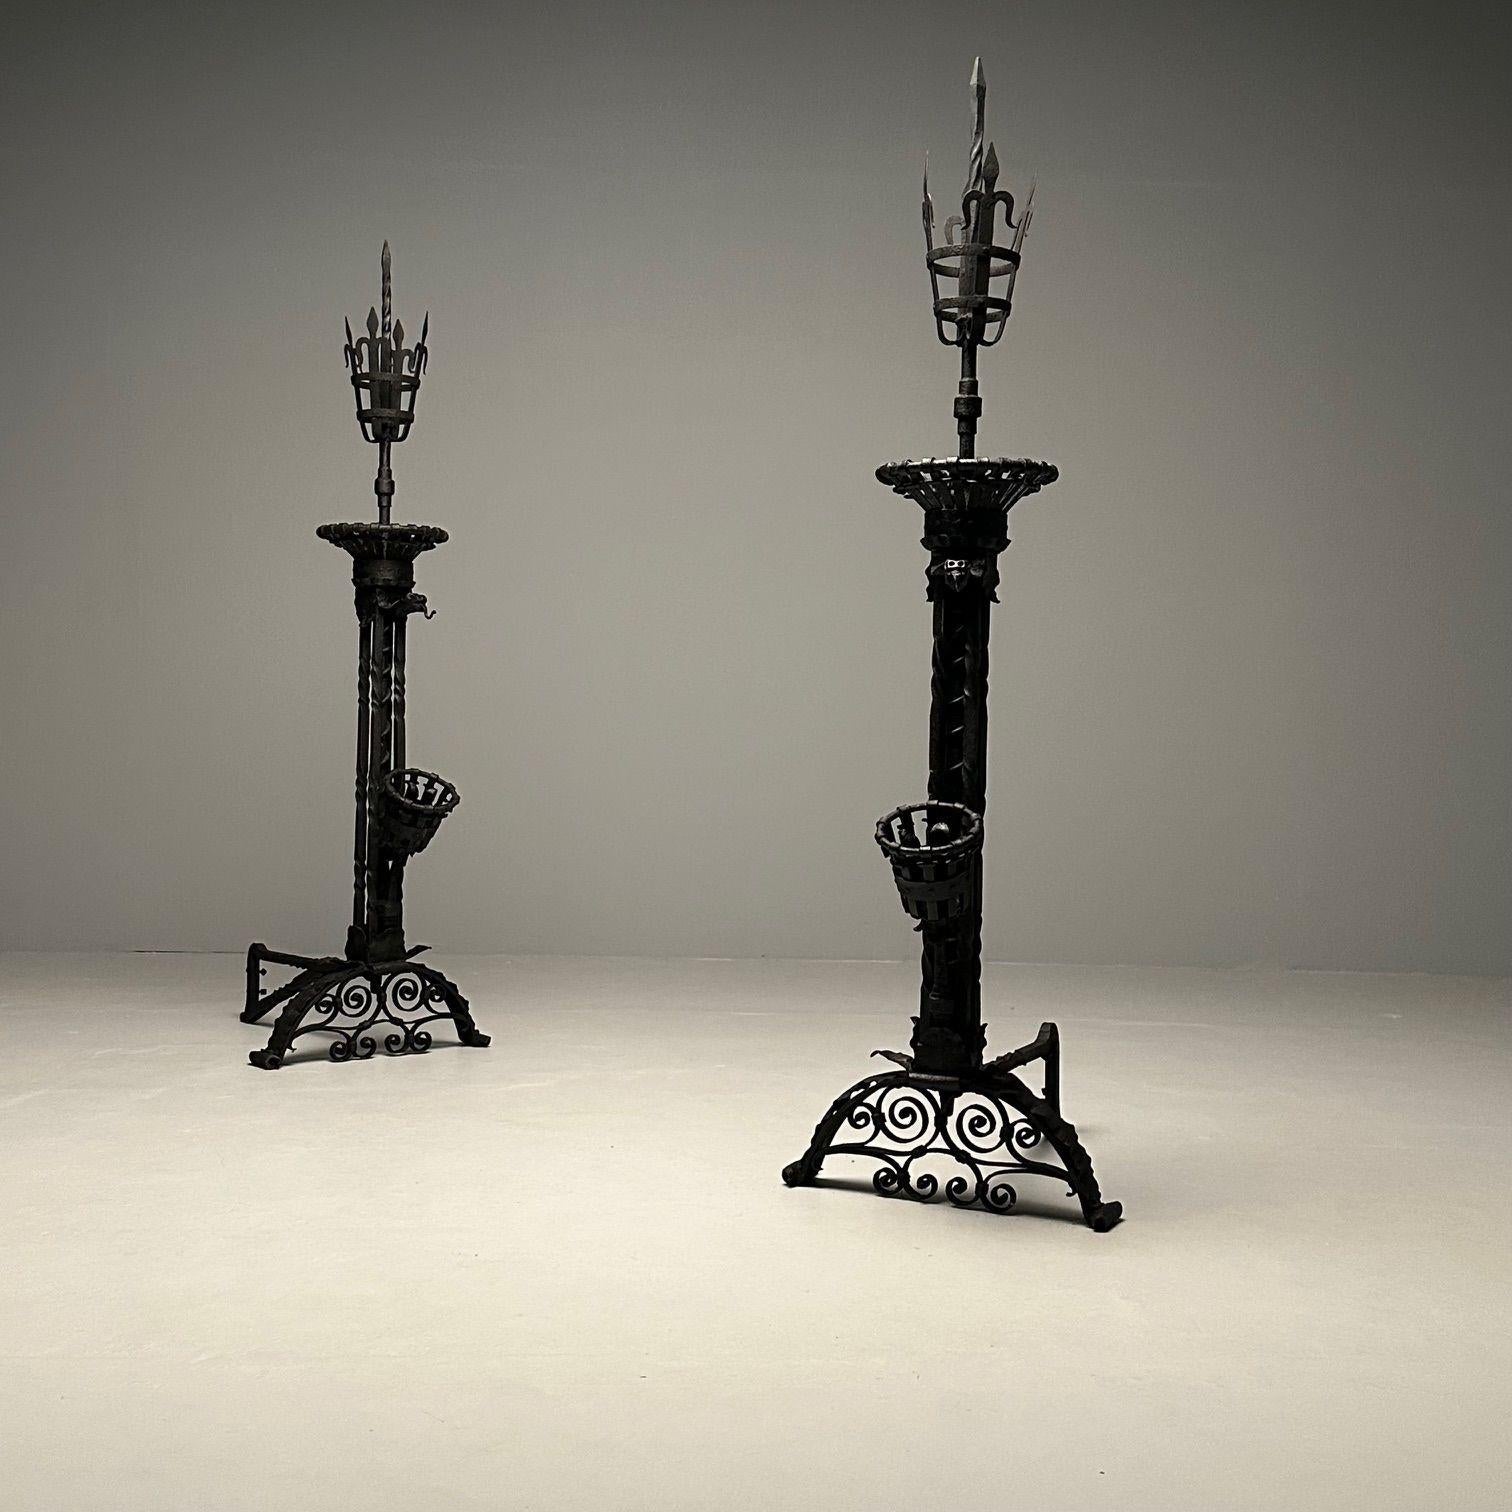 Pair Monumental Samuel Yellin Style Wrought Iron Andirons, Italian Renaissance, Late 19th early 20th century

Palatial in Size are these finely cast pair of Arts and Crafts Gothic andirons attributed to Samuel Yellin with orb finials scrolled weaved